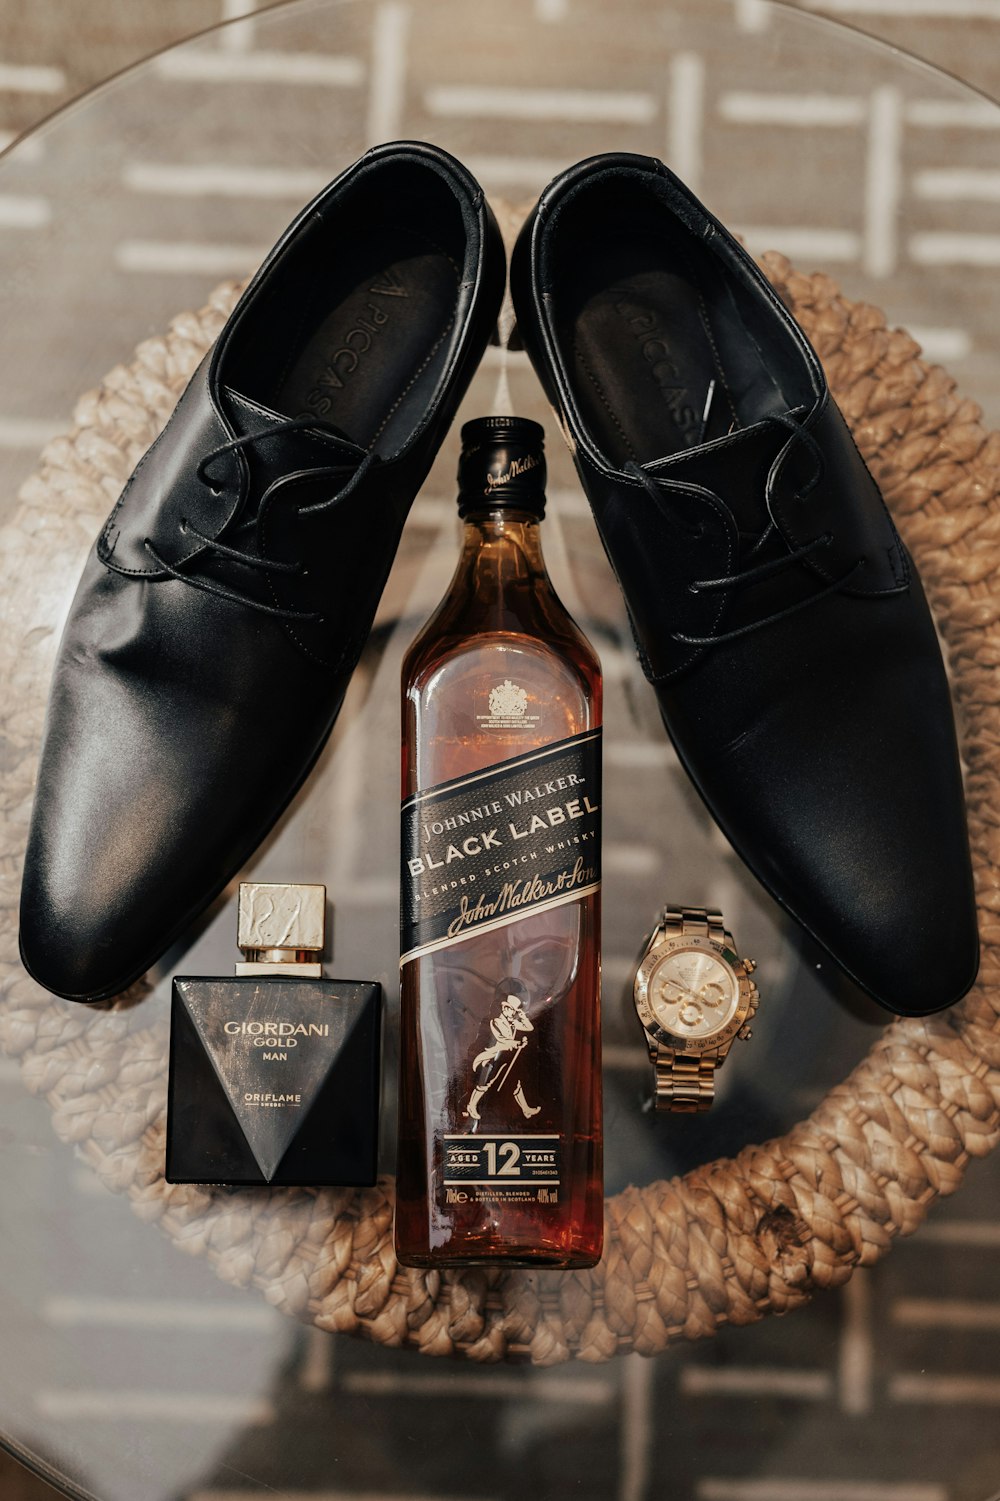 a bottle of whisky, a watch, and a pair of shoes on a table